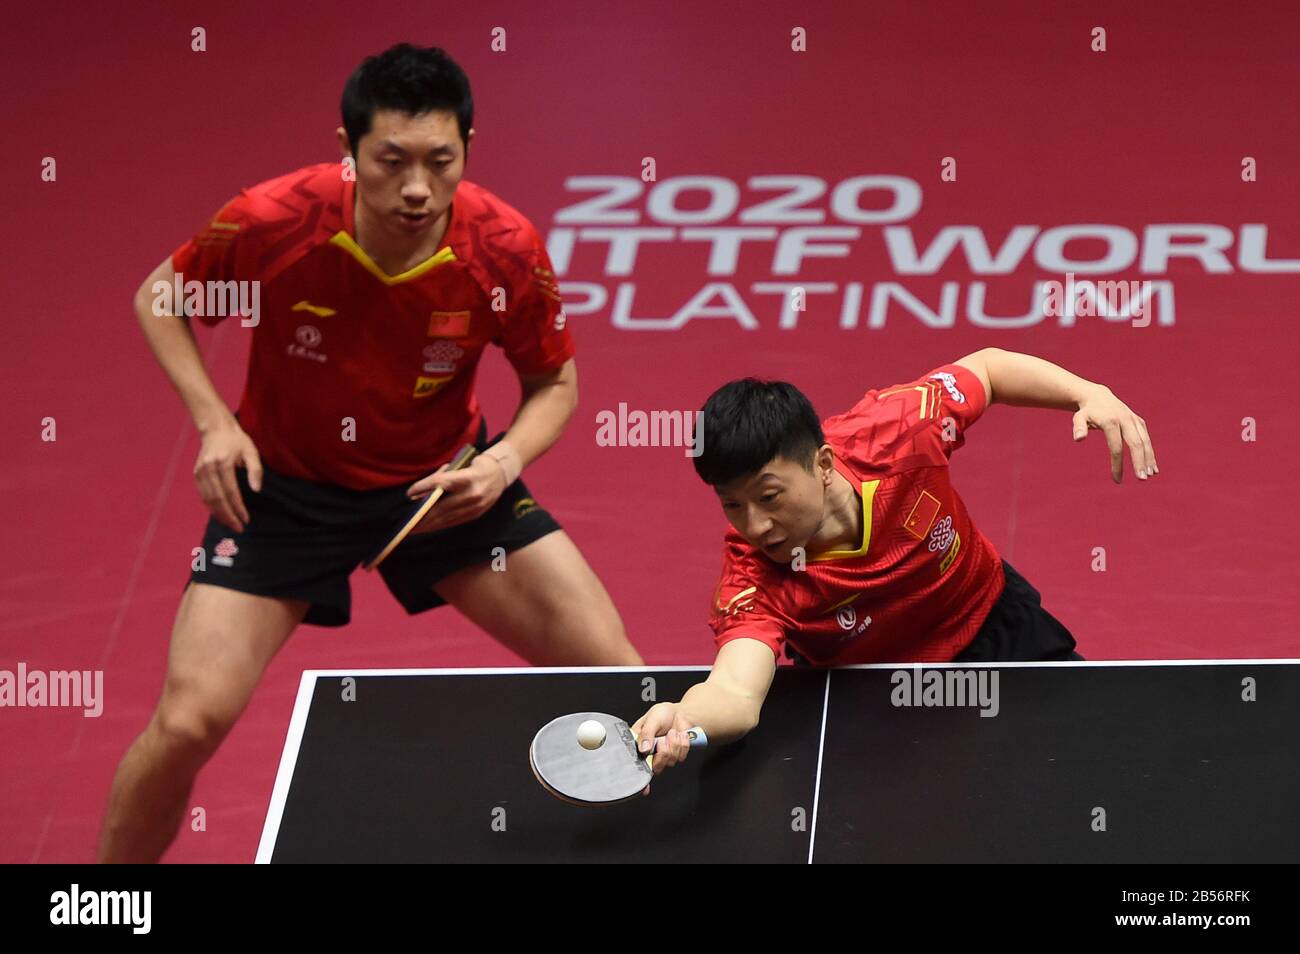 Doha. 7th Mar, 2020. Ma Long (R)/Xu Xin of China compete during the men's  doubles final match against Liam Pitchford /Paul Drinkhall of England at 2020  ITTF Qatar Open in Doha, Qatar